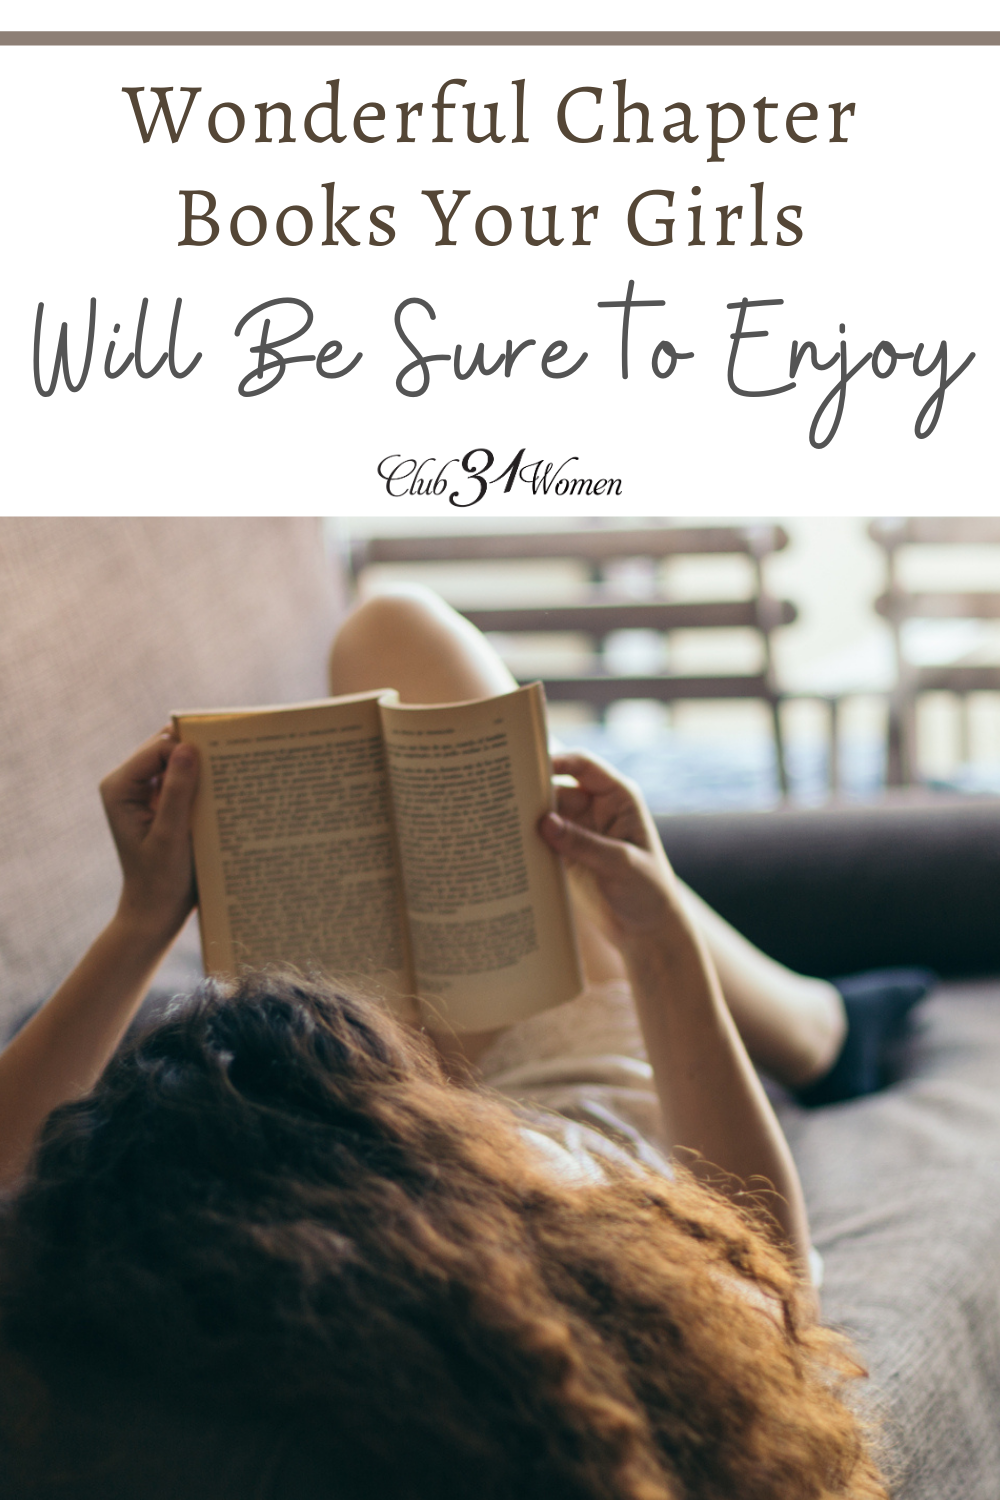 It can be challenging to find good, wholesome chapter books for girls so here is a list to keep your girl, young and old, reading! via @Club31Women